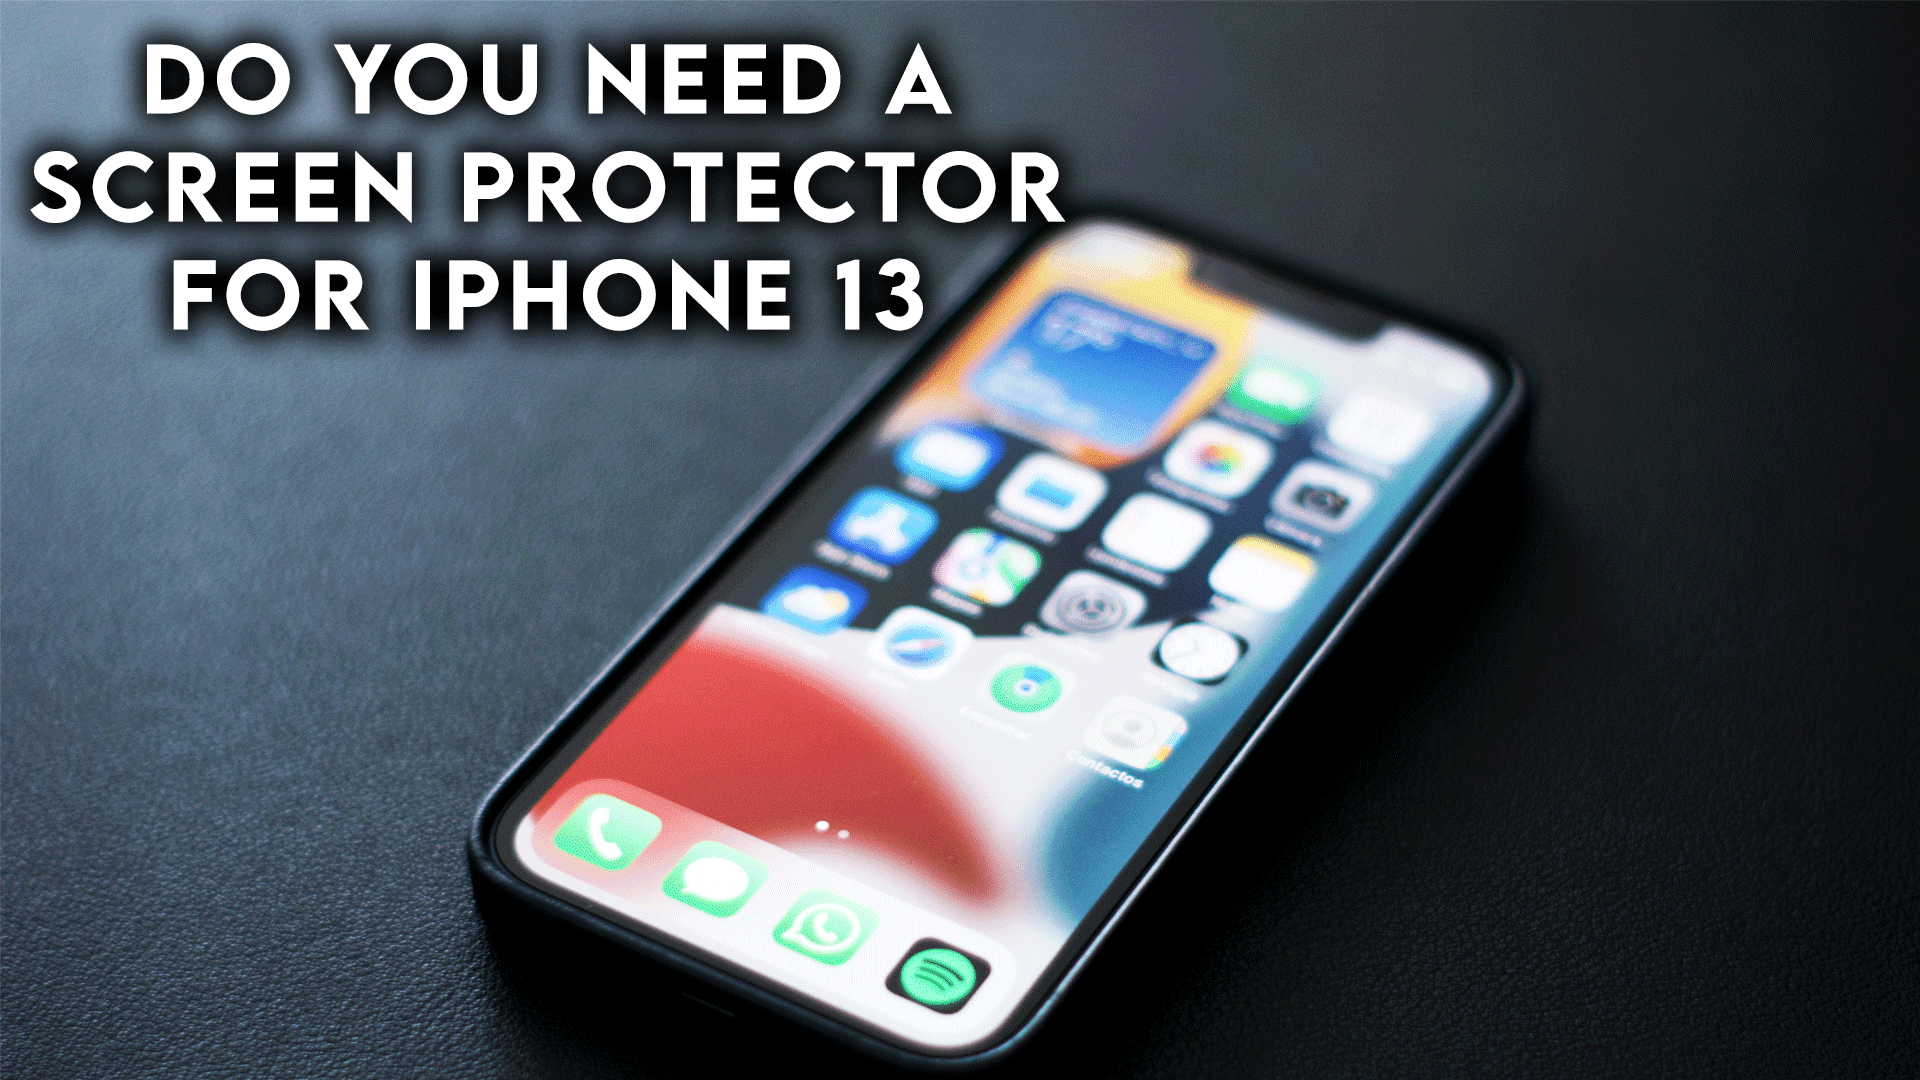 Do You Need A Screen Protector For iPhone 13